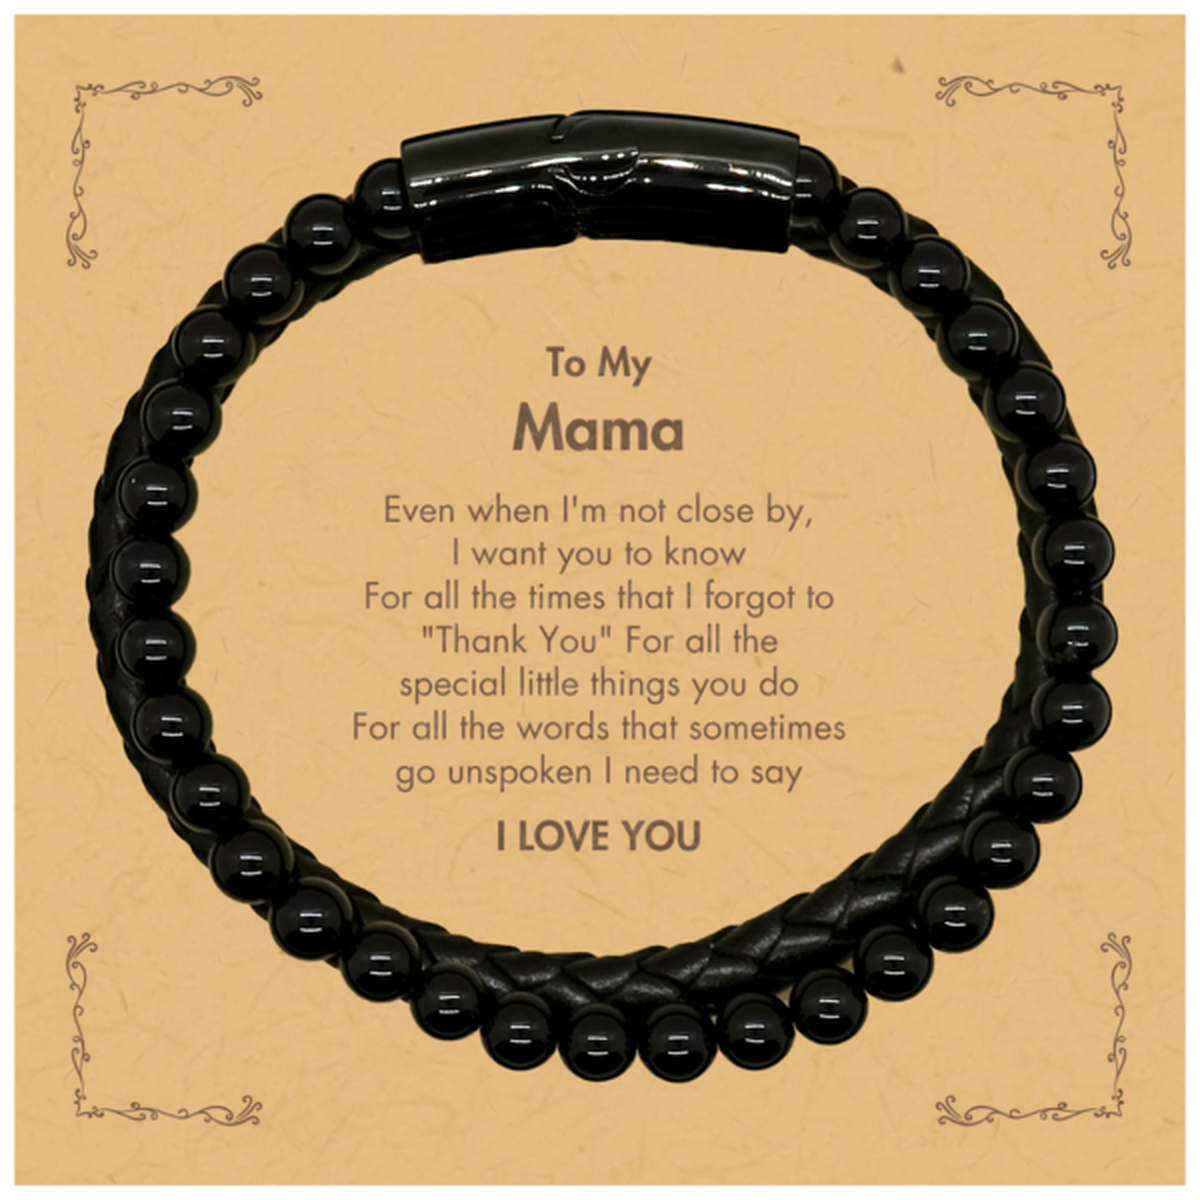 Thank You Gifts for Mama, Keepsake Stone Leather Bracelets Gifts for Mama Birthday Mother's day Father's Day Mama For all the words That sometimes go unspoken I need to say I LOVE YOU